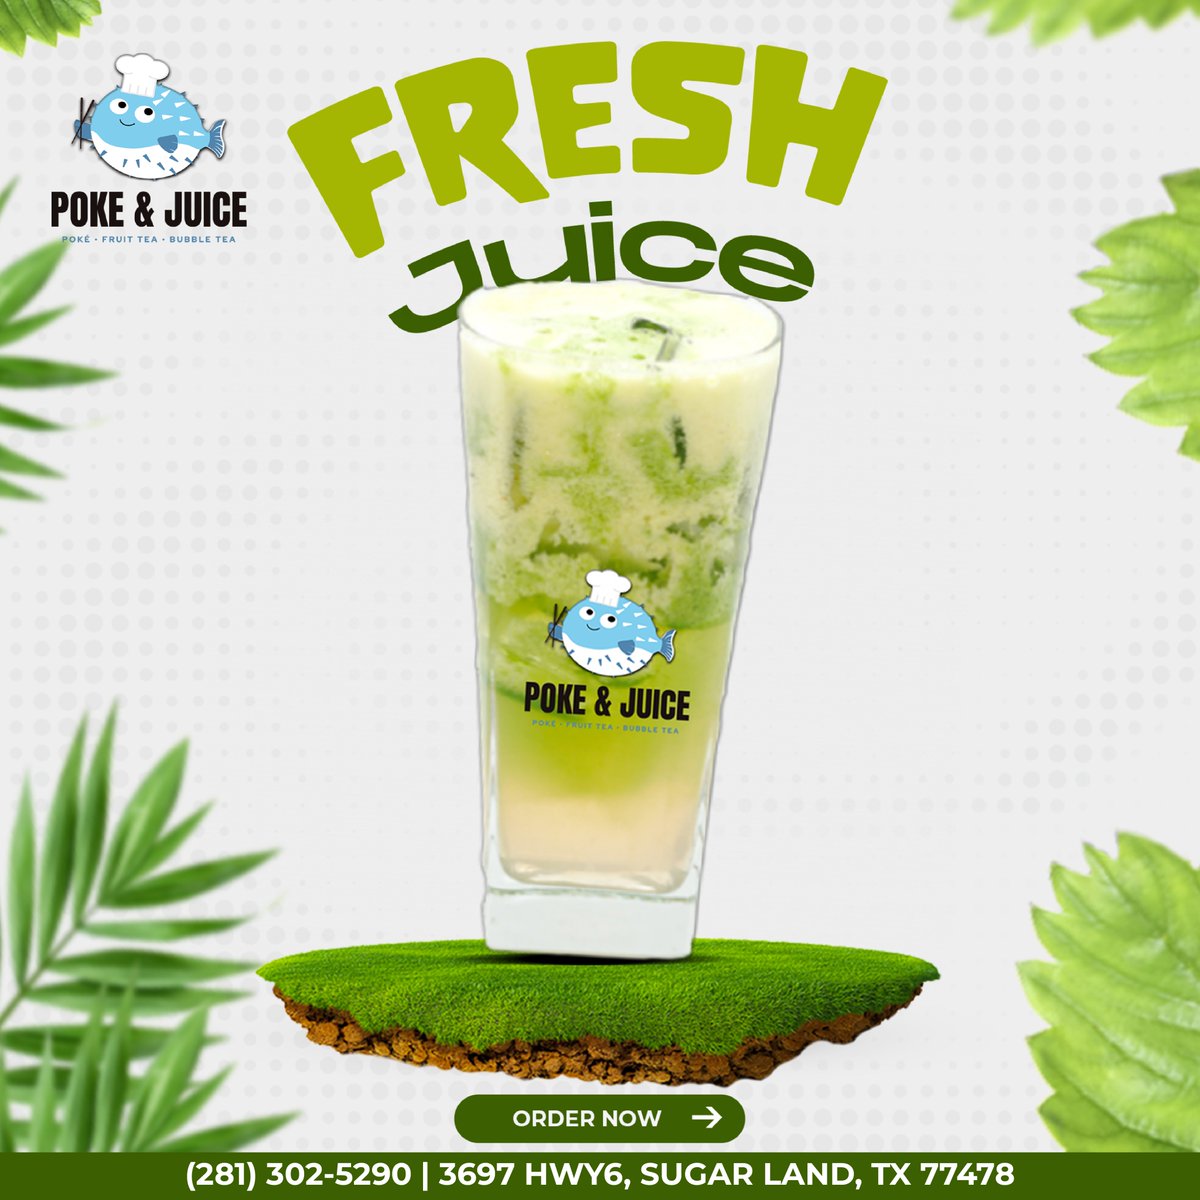 Jumpstart your health journey with a fresh juice cleanse! 🍹🍐
#smoothierecipes #smoothiebowls #foodporno #inksup #foodpornph #smoothietime #drinksporn #drinkswithfriends #smoothieoftheday #smoothielove #smoothielover #freshprinceofbelair #smoothierecipe #foodpornitaly